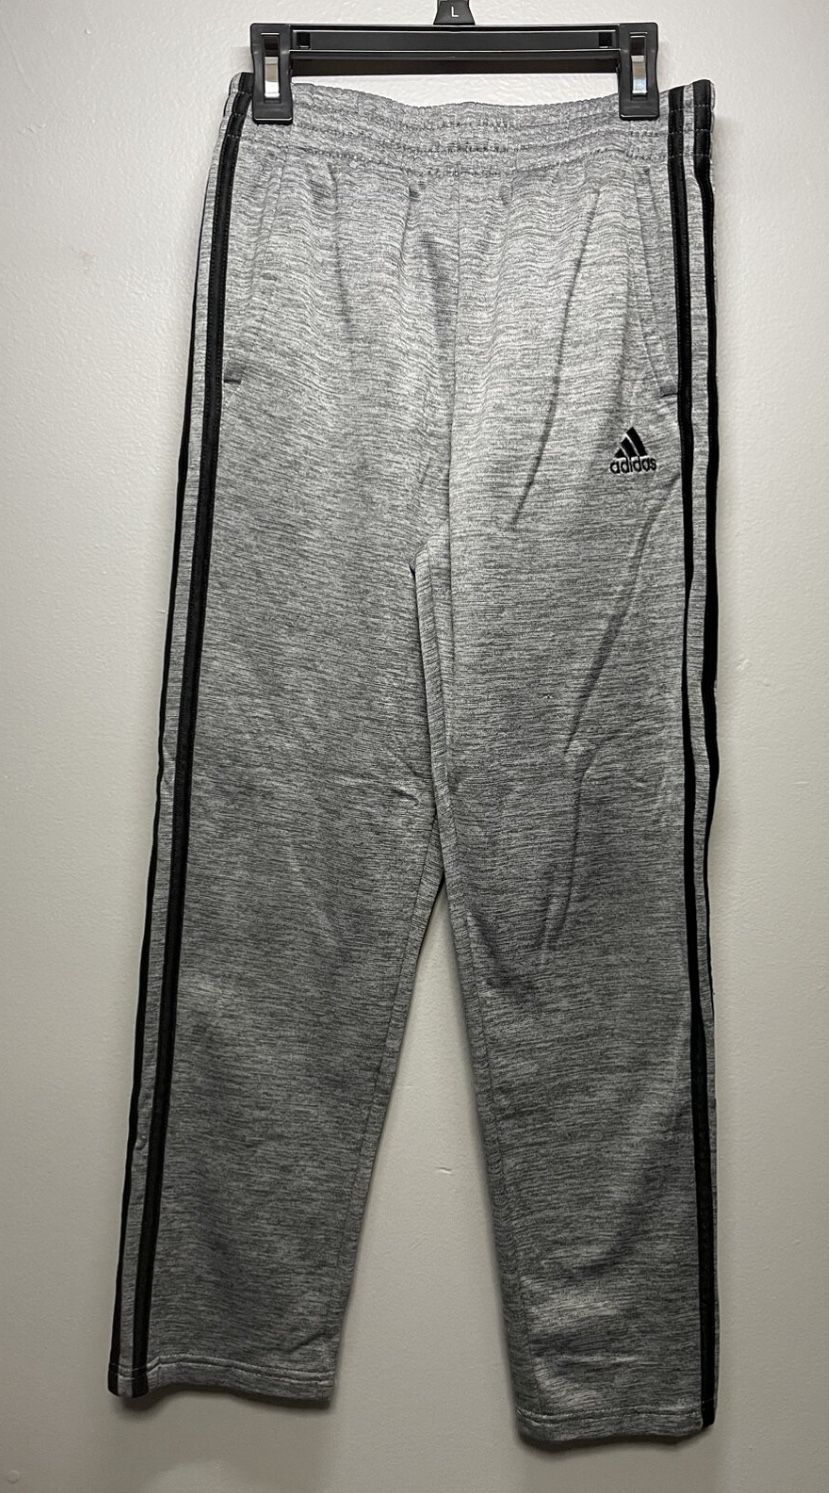 Adidas Boys Joggers Size M (10/12) with pockets